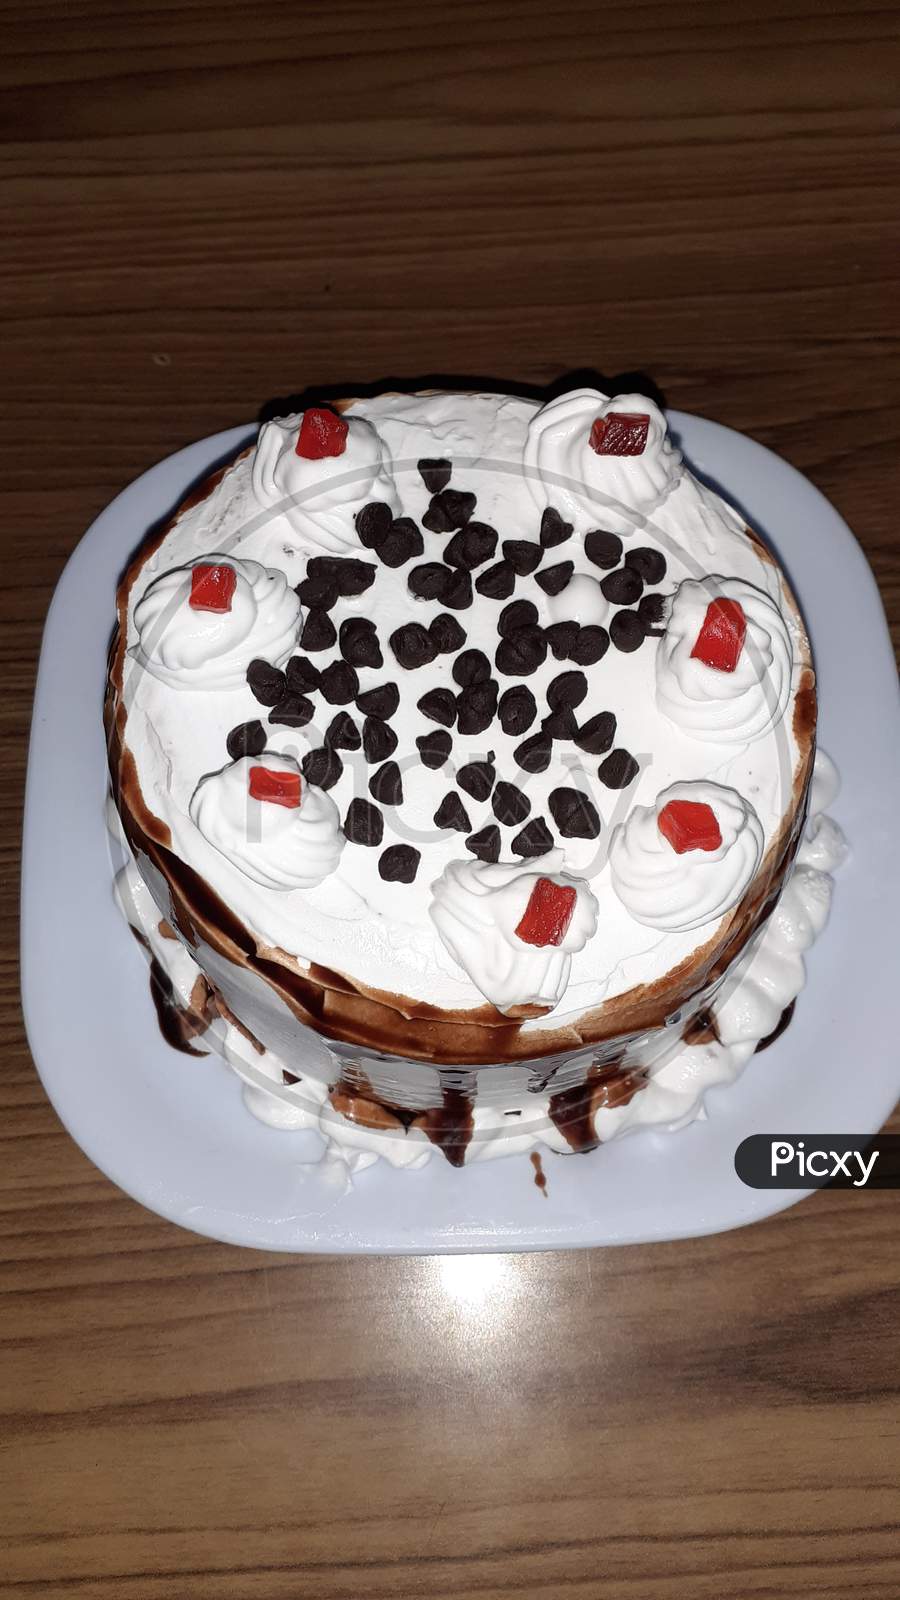 Image of home made ice cake-BN343057-Picxy